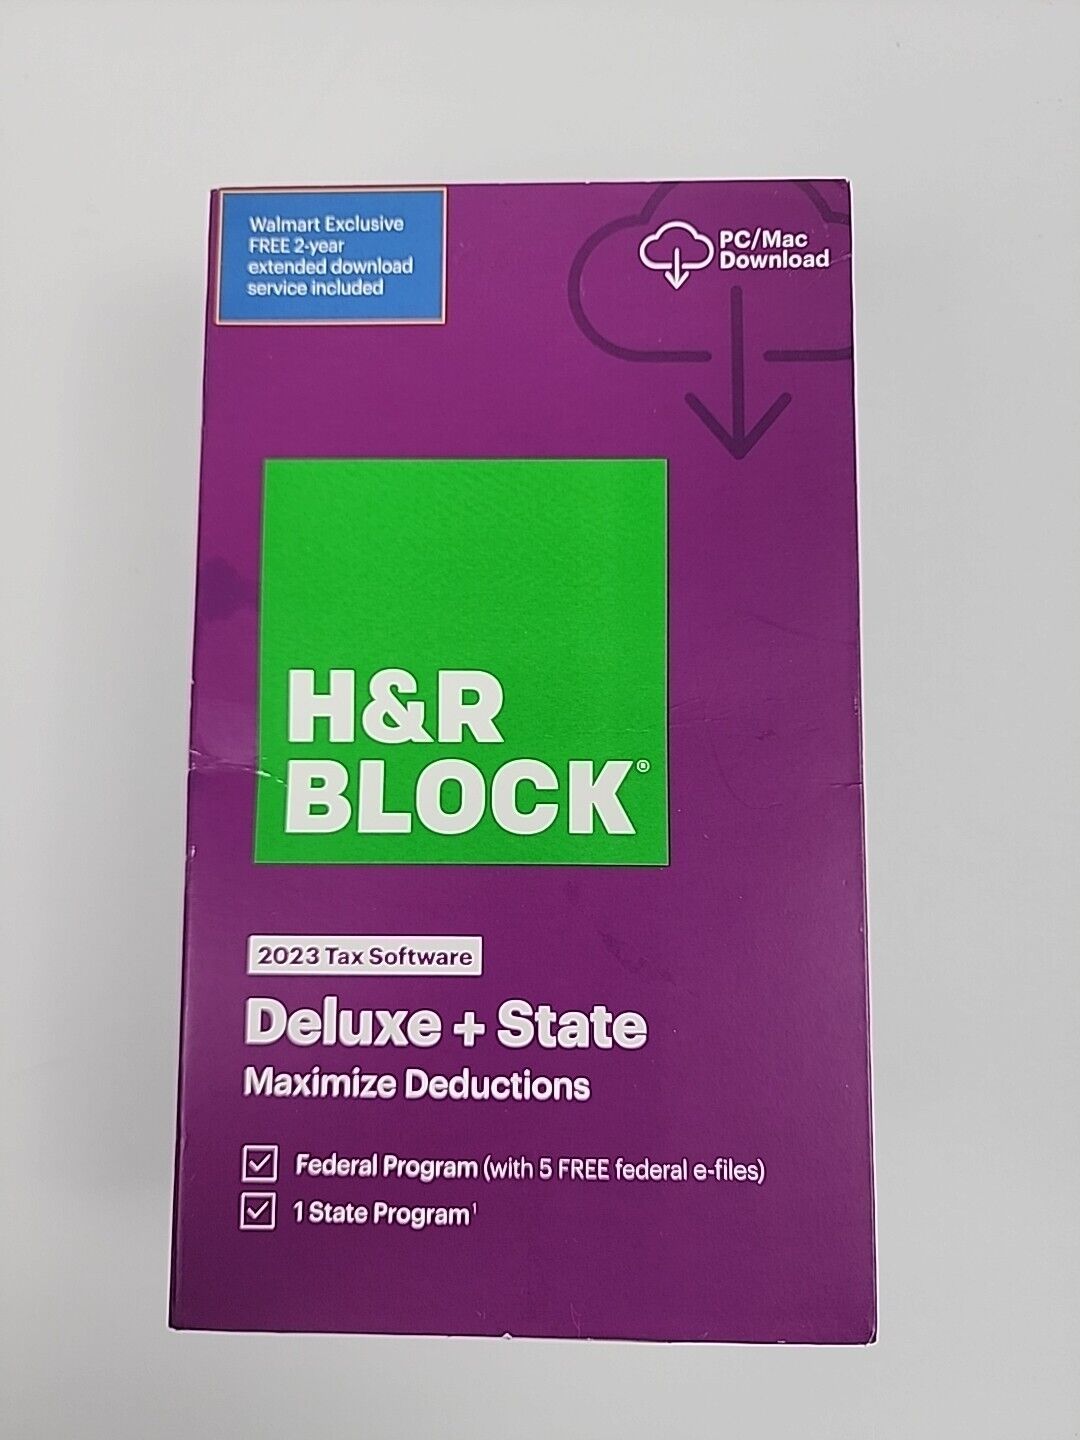 H&R Block 2023 Tax Software - Deluxe + State - Link And Key Code Will Be Emailed